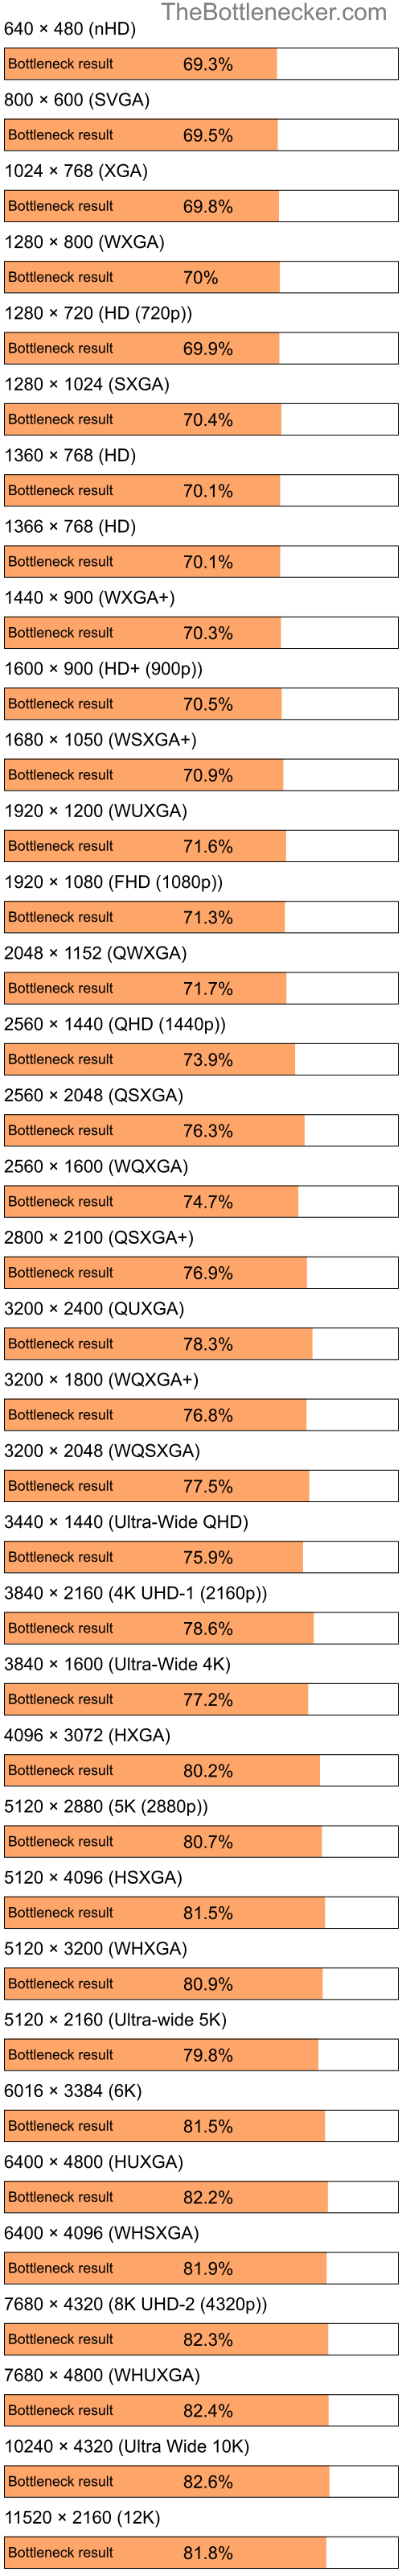 Bottleneck results by resolution for Intel Pentium 4 and NVIDIA GeForce 9100M G in General Tasks